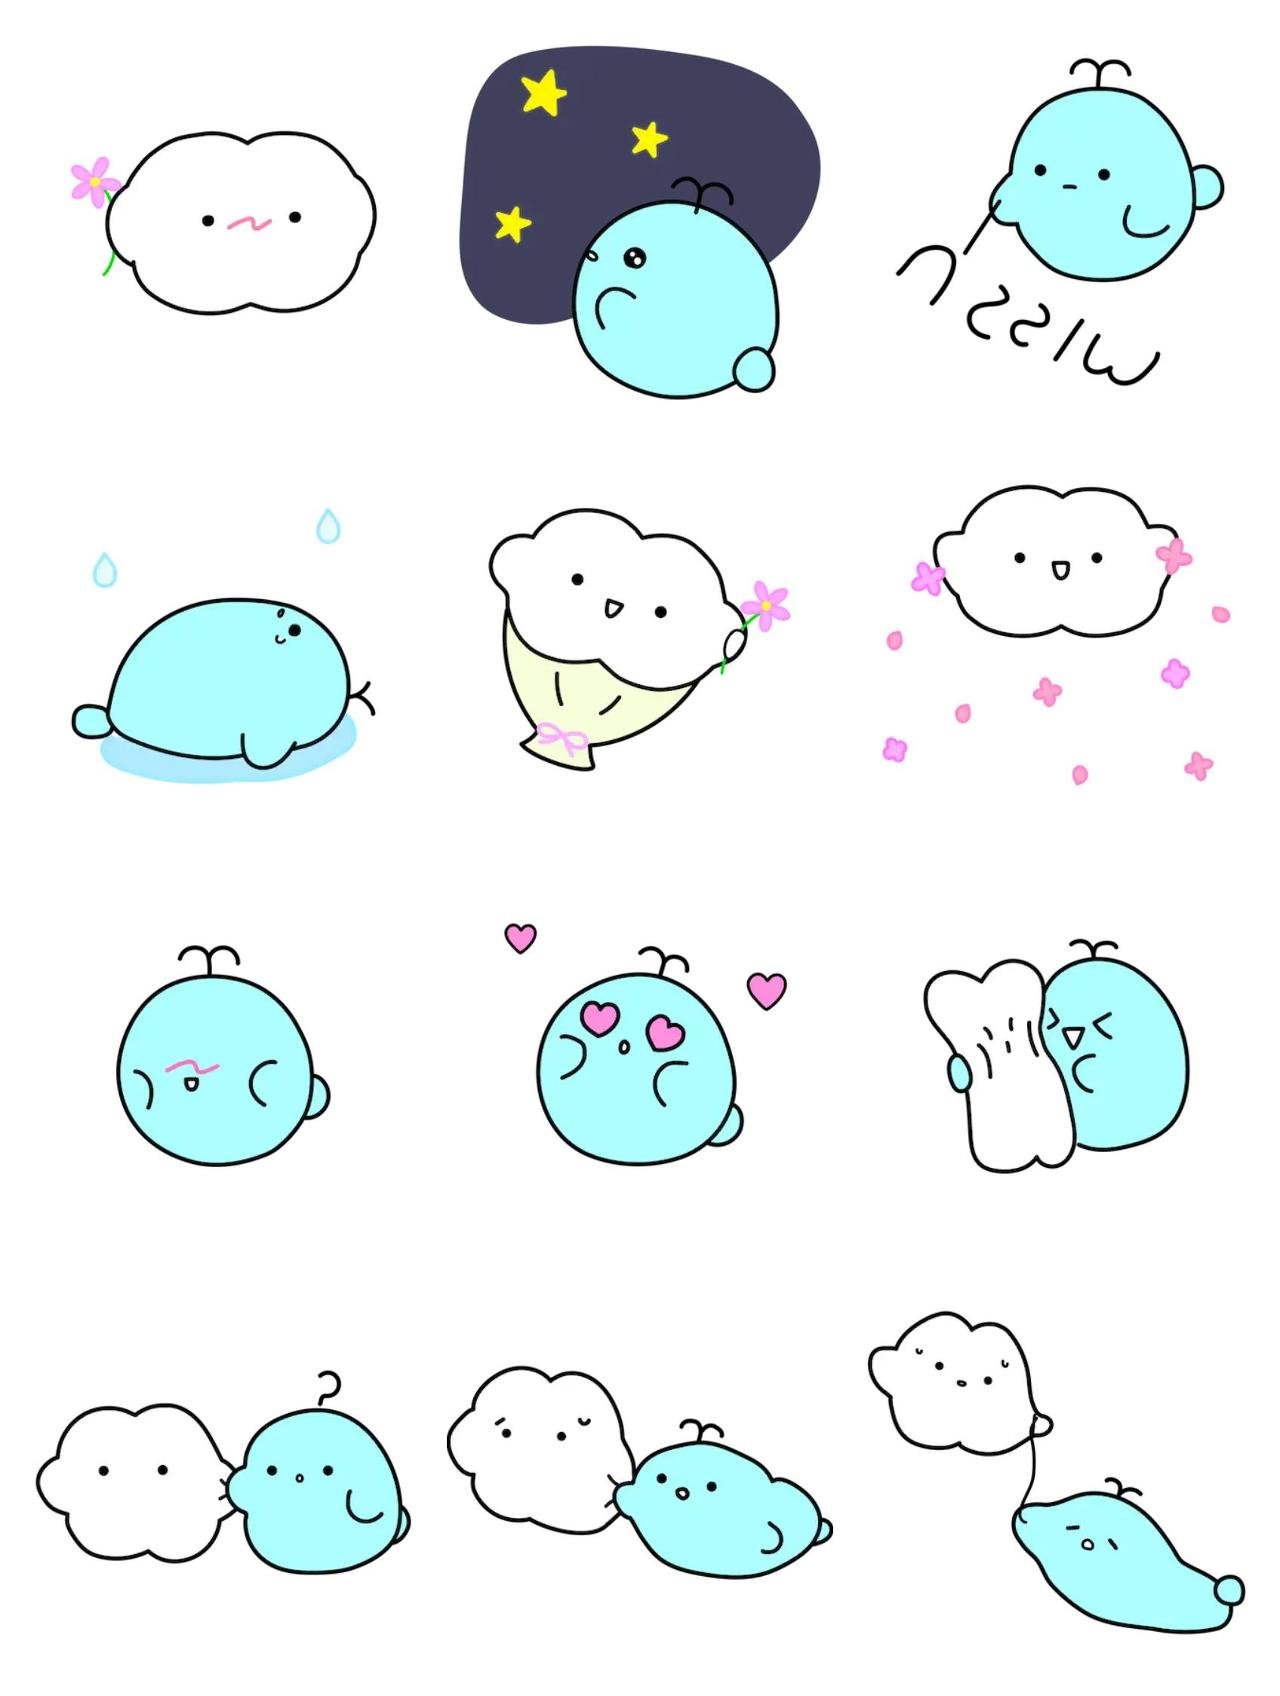 Whale loves cloud 3 Animals,Romance sticker pack for Whatsapp, Telegram, Signal, and others chatting and message apps